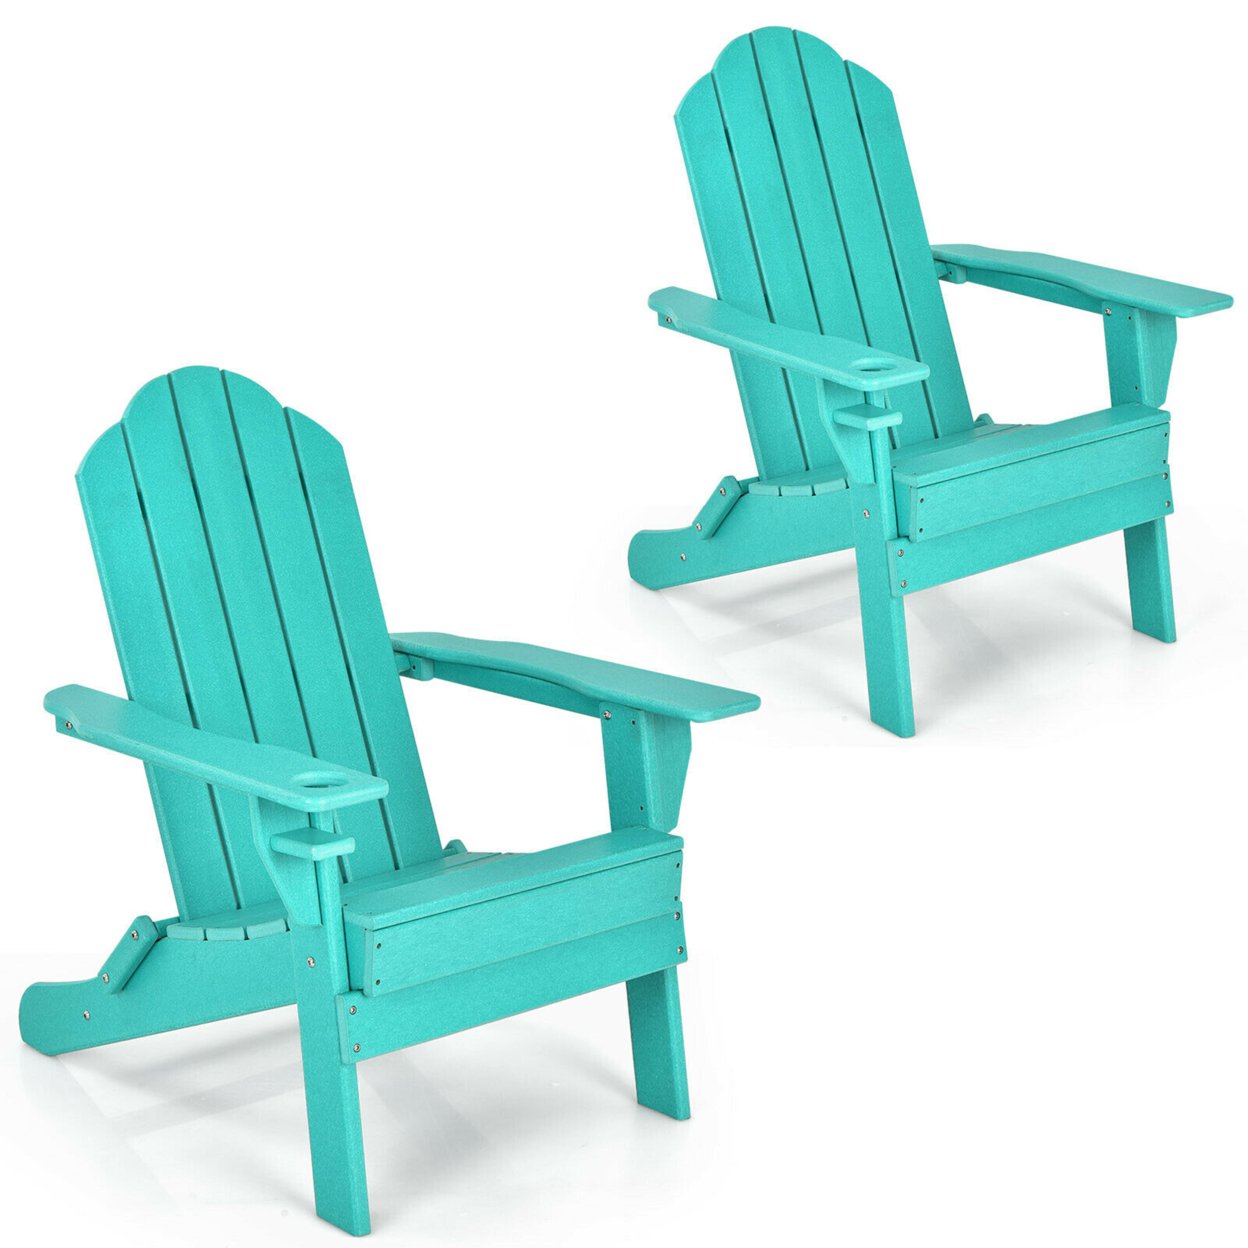 2PCS Patio Folding Adirondack Chair Weather Resistant Cup Holder Yard - Turquoise